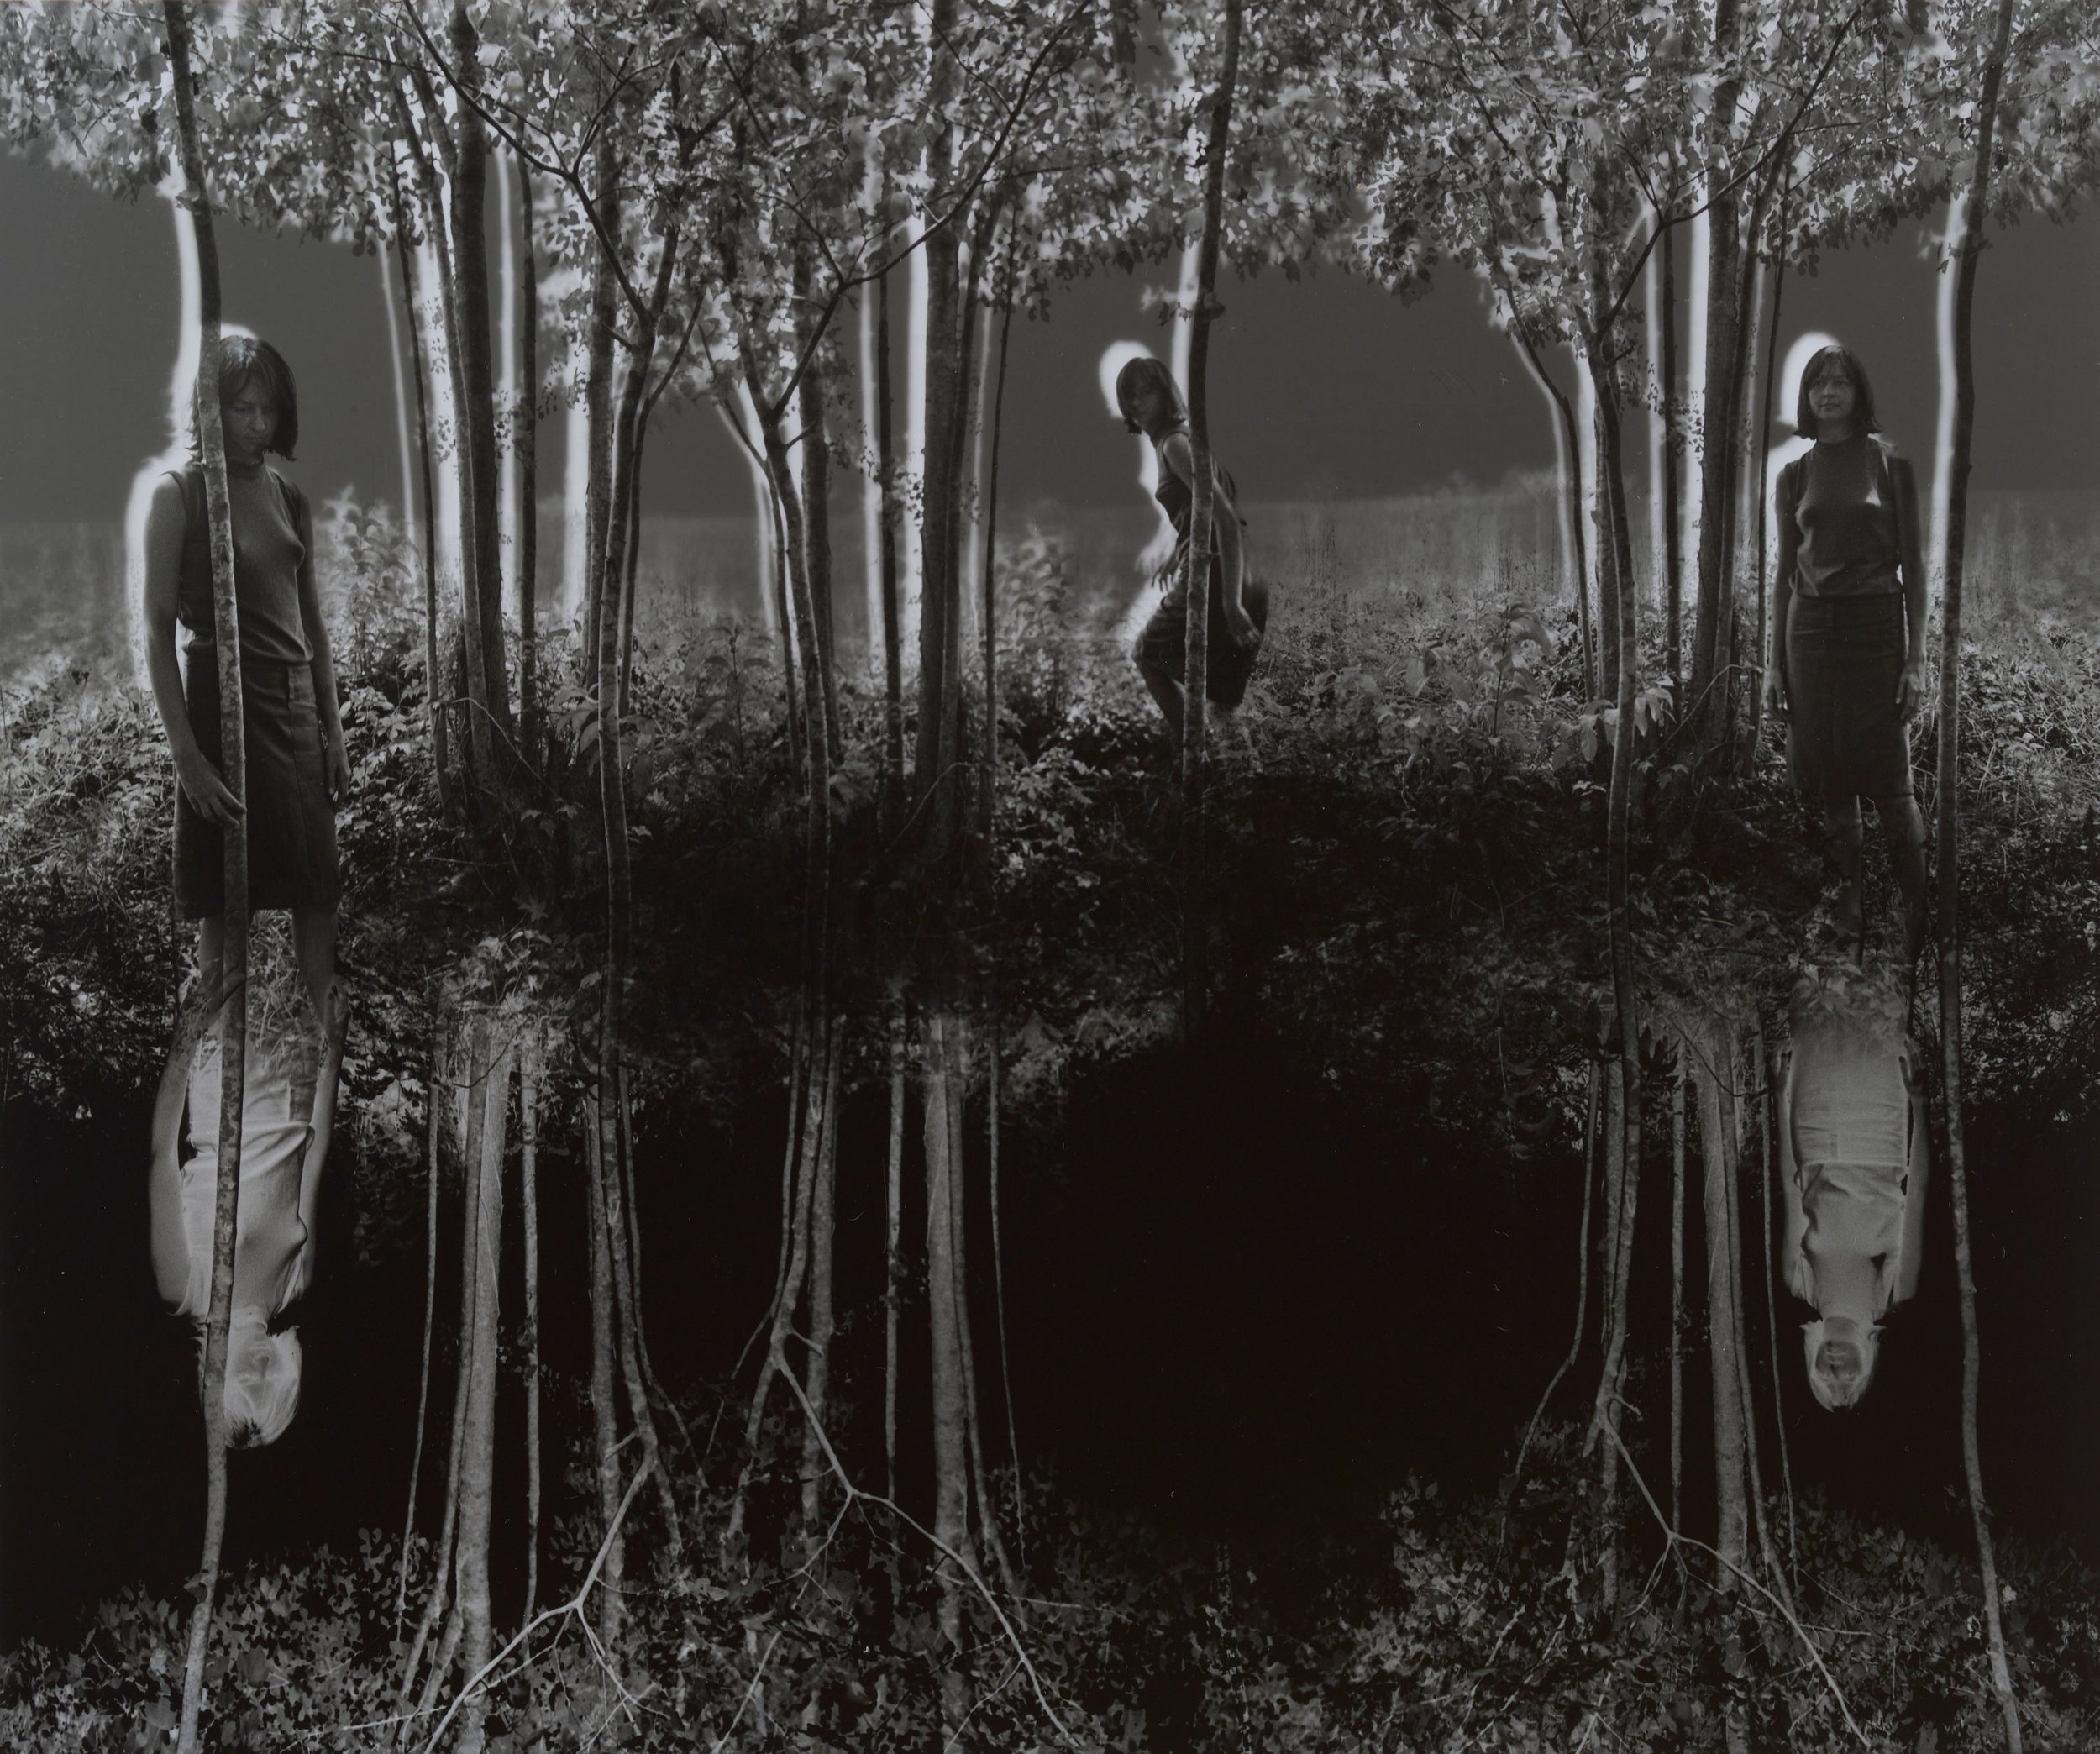  Jerry N. Uelsmann (United States, 1934–2022),  Small Woods Where I Met Myself , 1967, gelatin silver print, 10 1/2 x 12 3/4 inches. Promised Gift from the Judy Glickman Lauder Collection, 11.2006.18. Image courtesy Luc Demers. © Jerry N. Uelsmann 